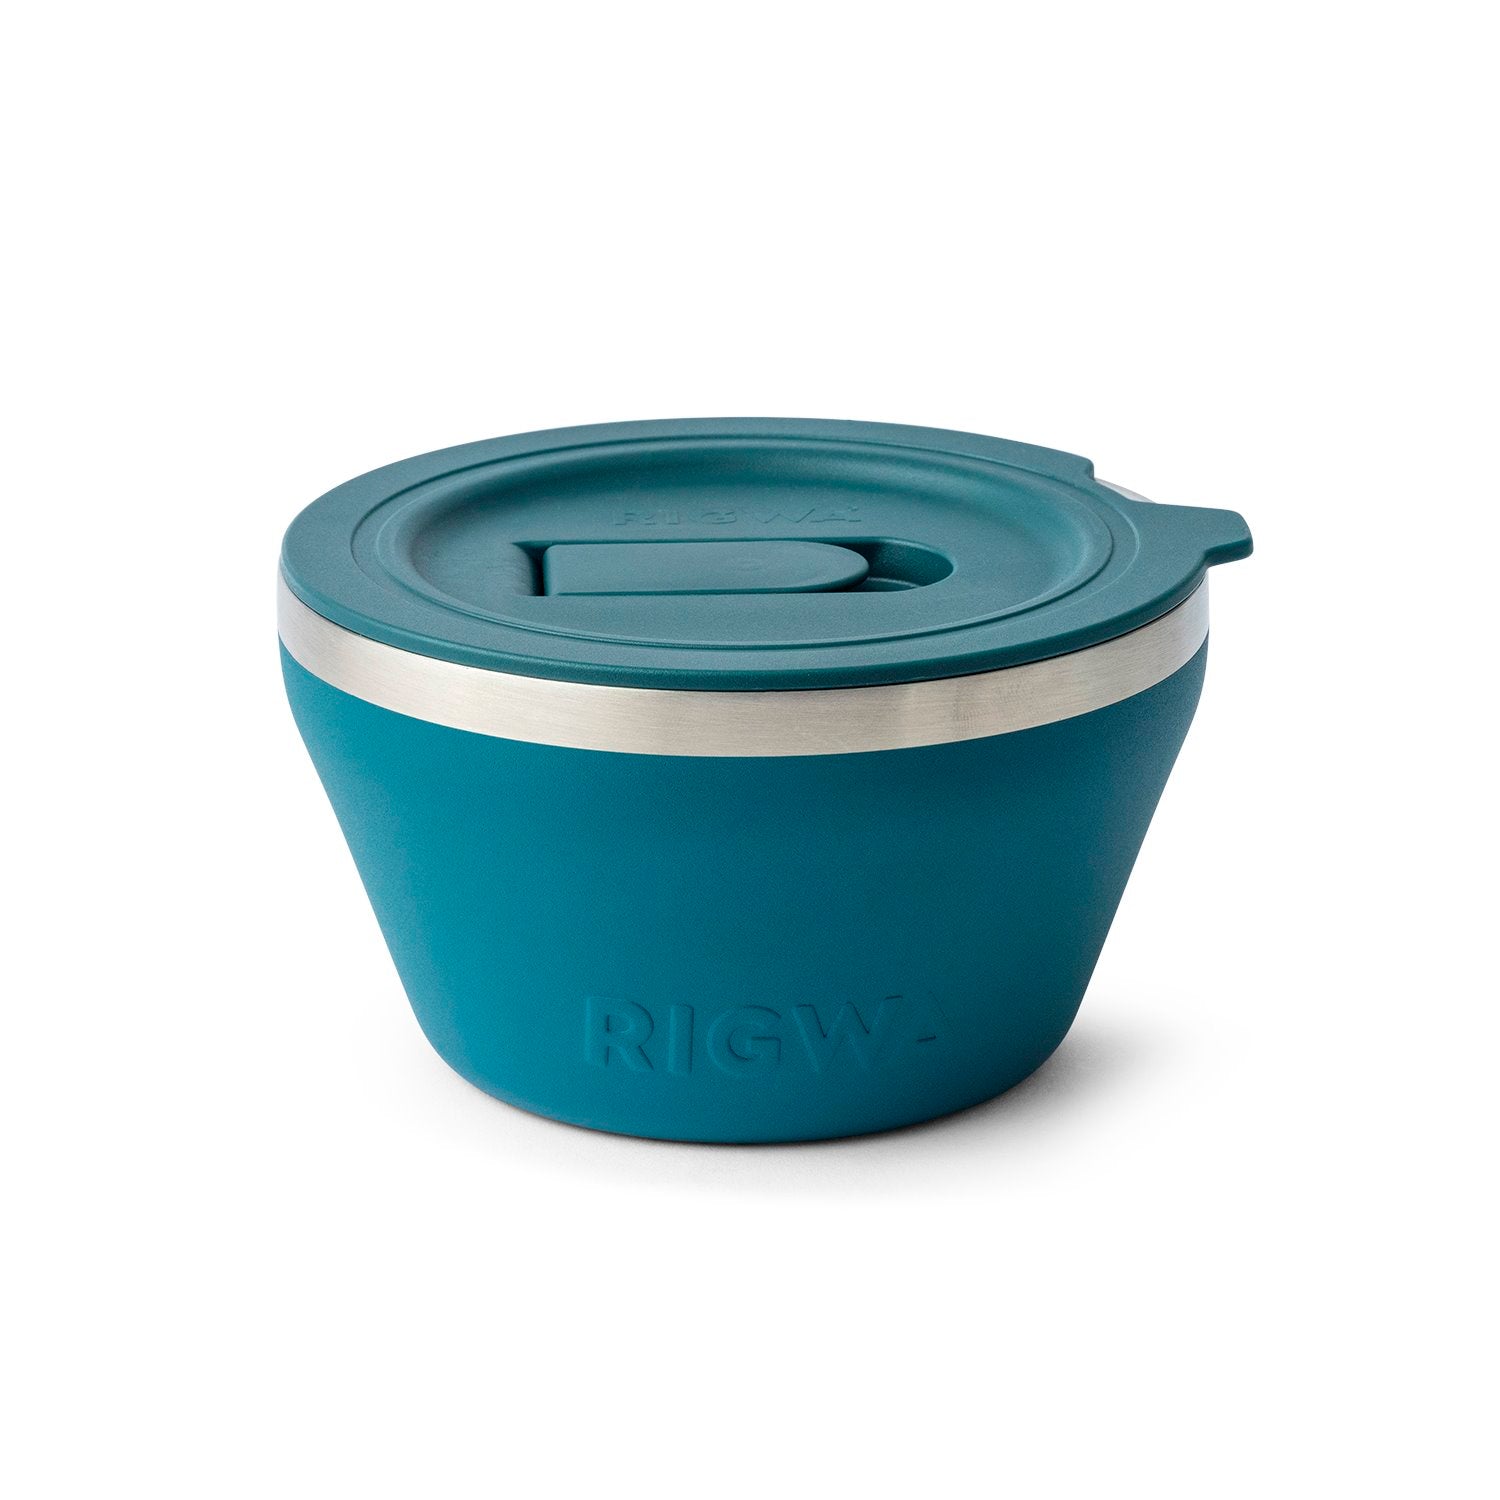 RigwaLife RIGWA 1.5 stainless steel insulated bowl keeps food hot and cold  for 8 hours » Gadget Flow